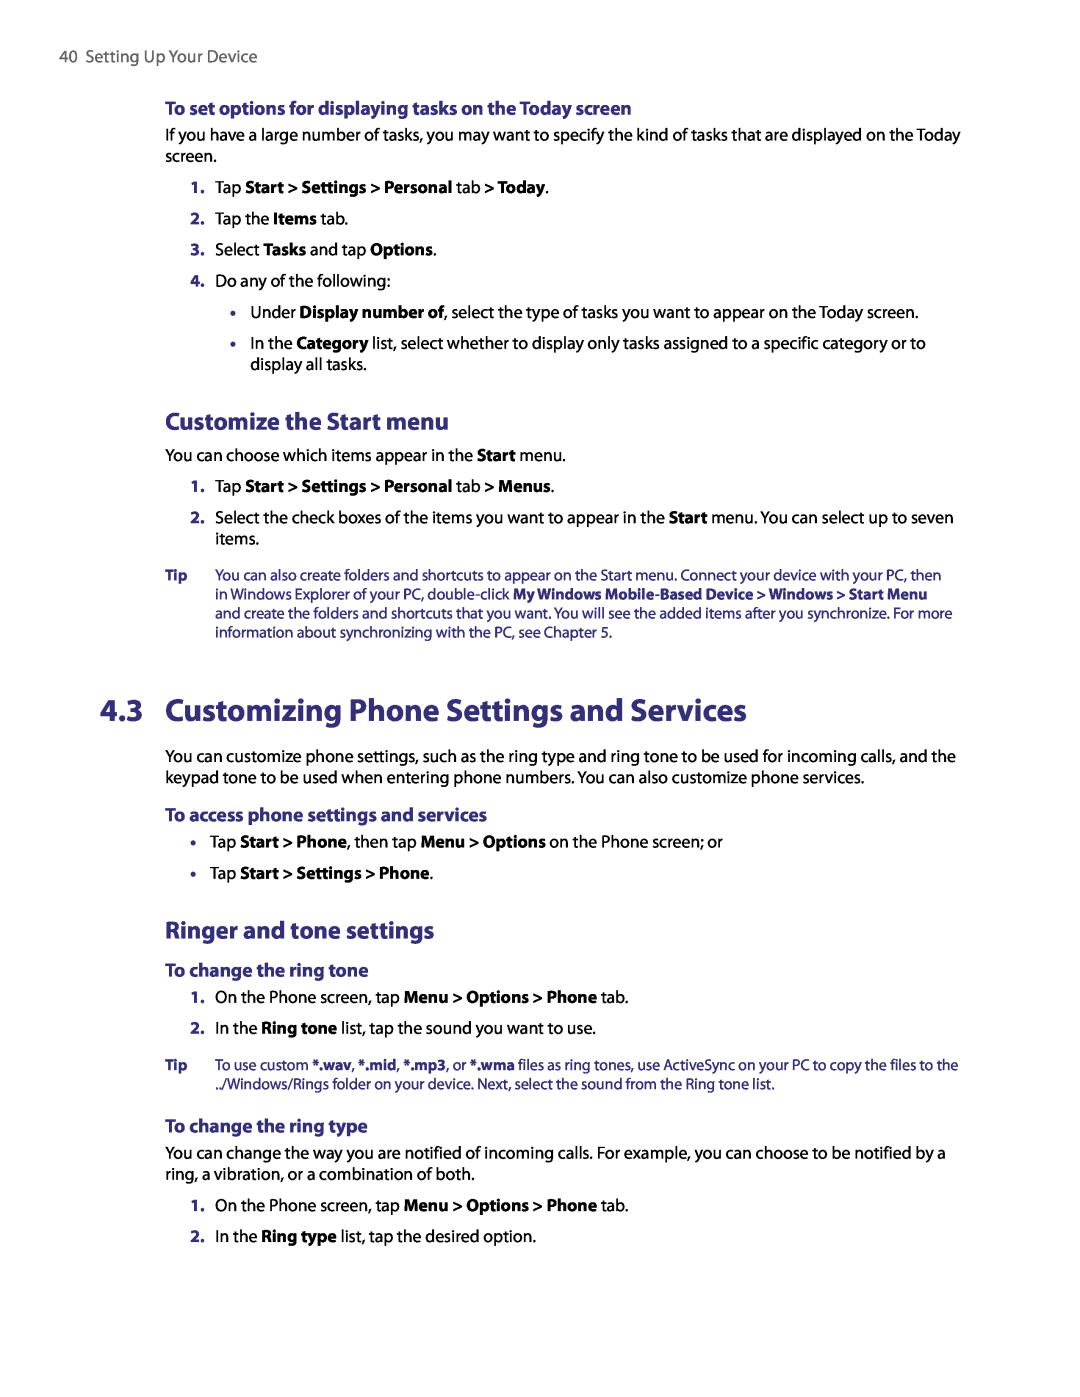 HTC PDA Phone user manual Customizing Phone Settings and Services, Customize the Start menu, Ringer and tone settings 